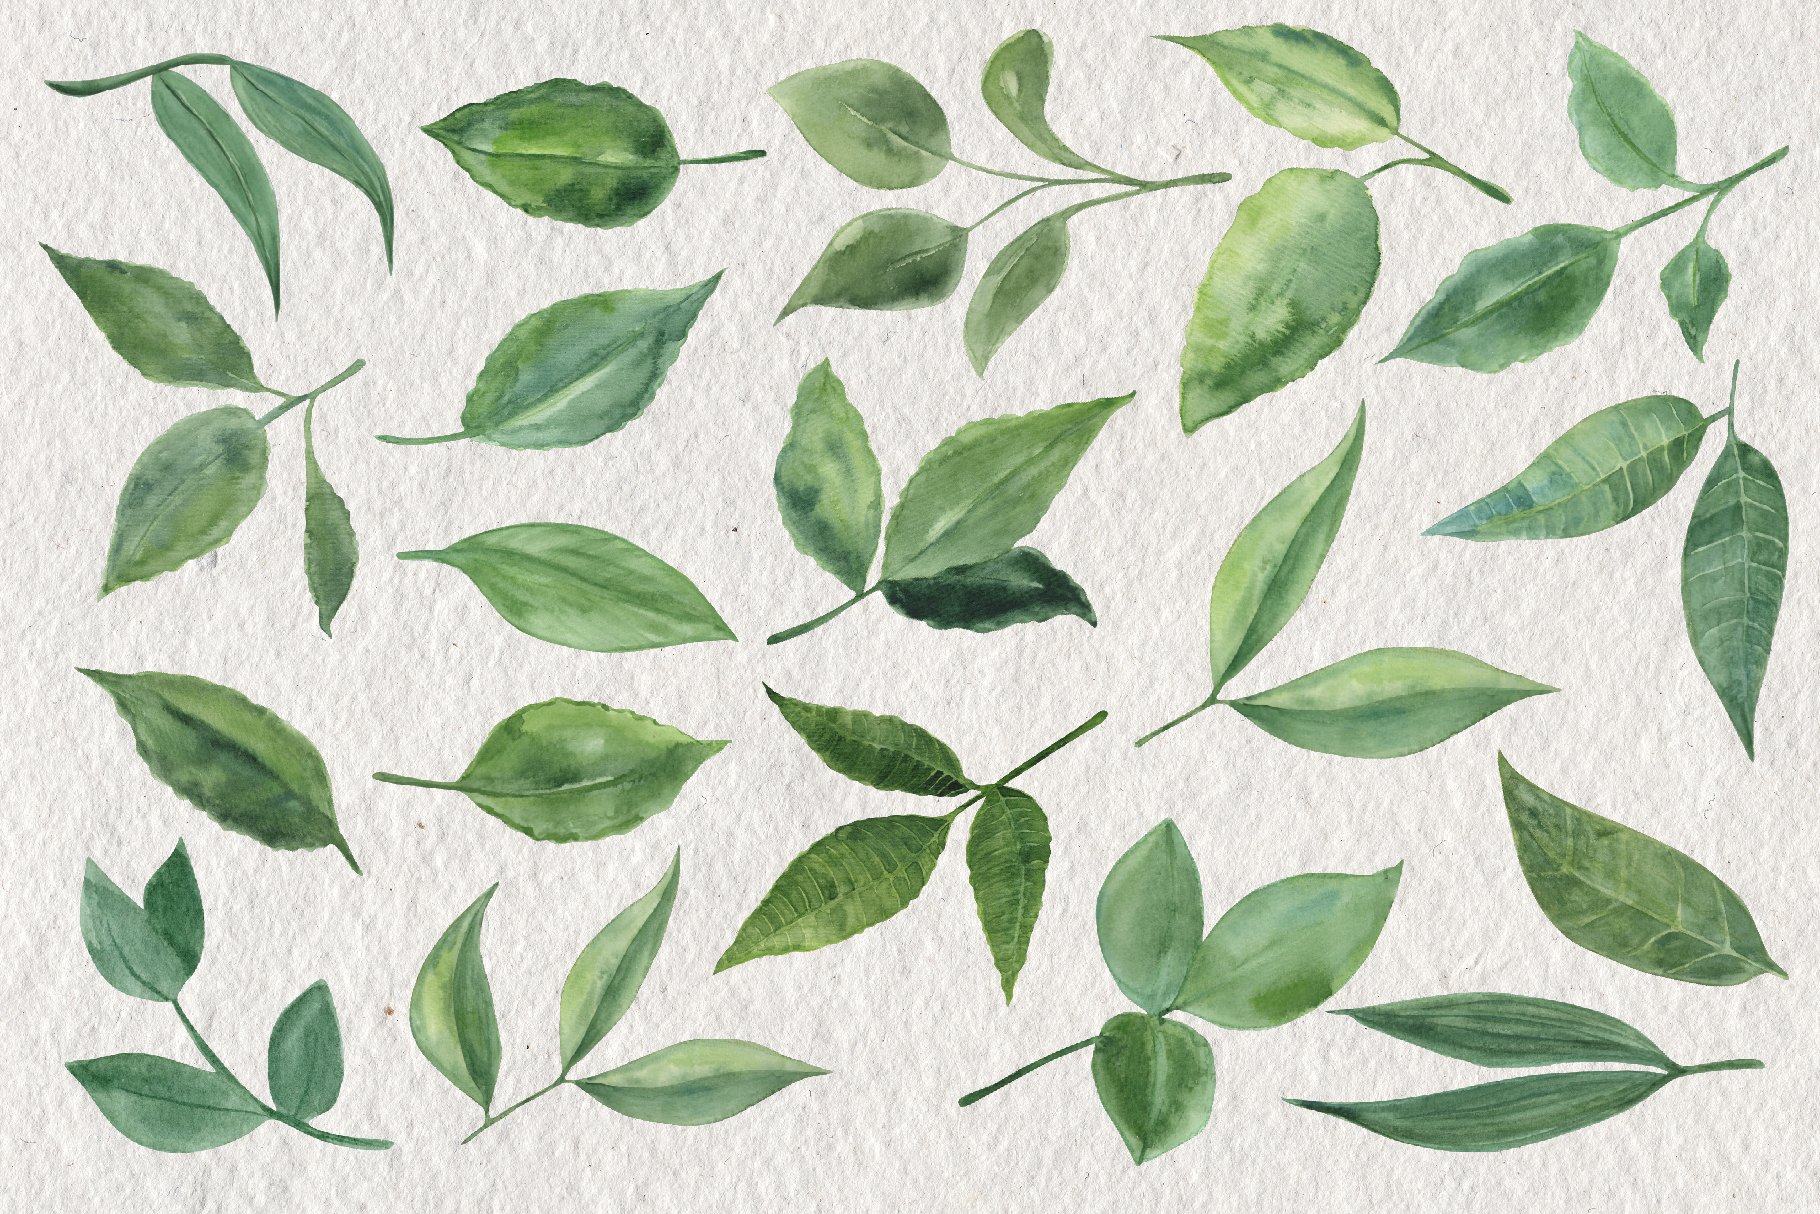 Painting of green leaves on a white background.